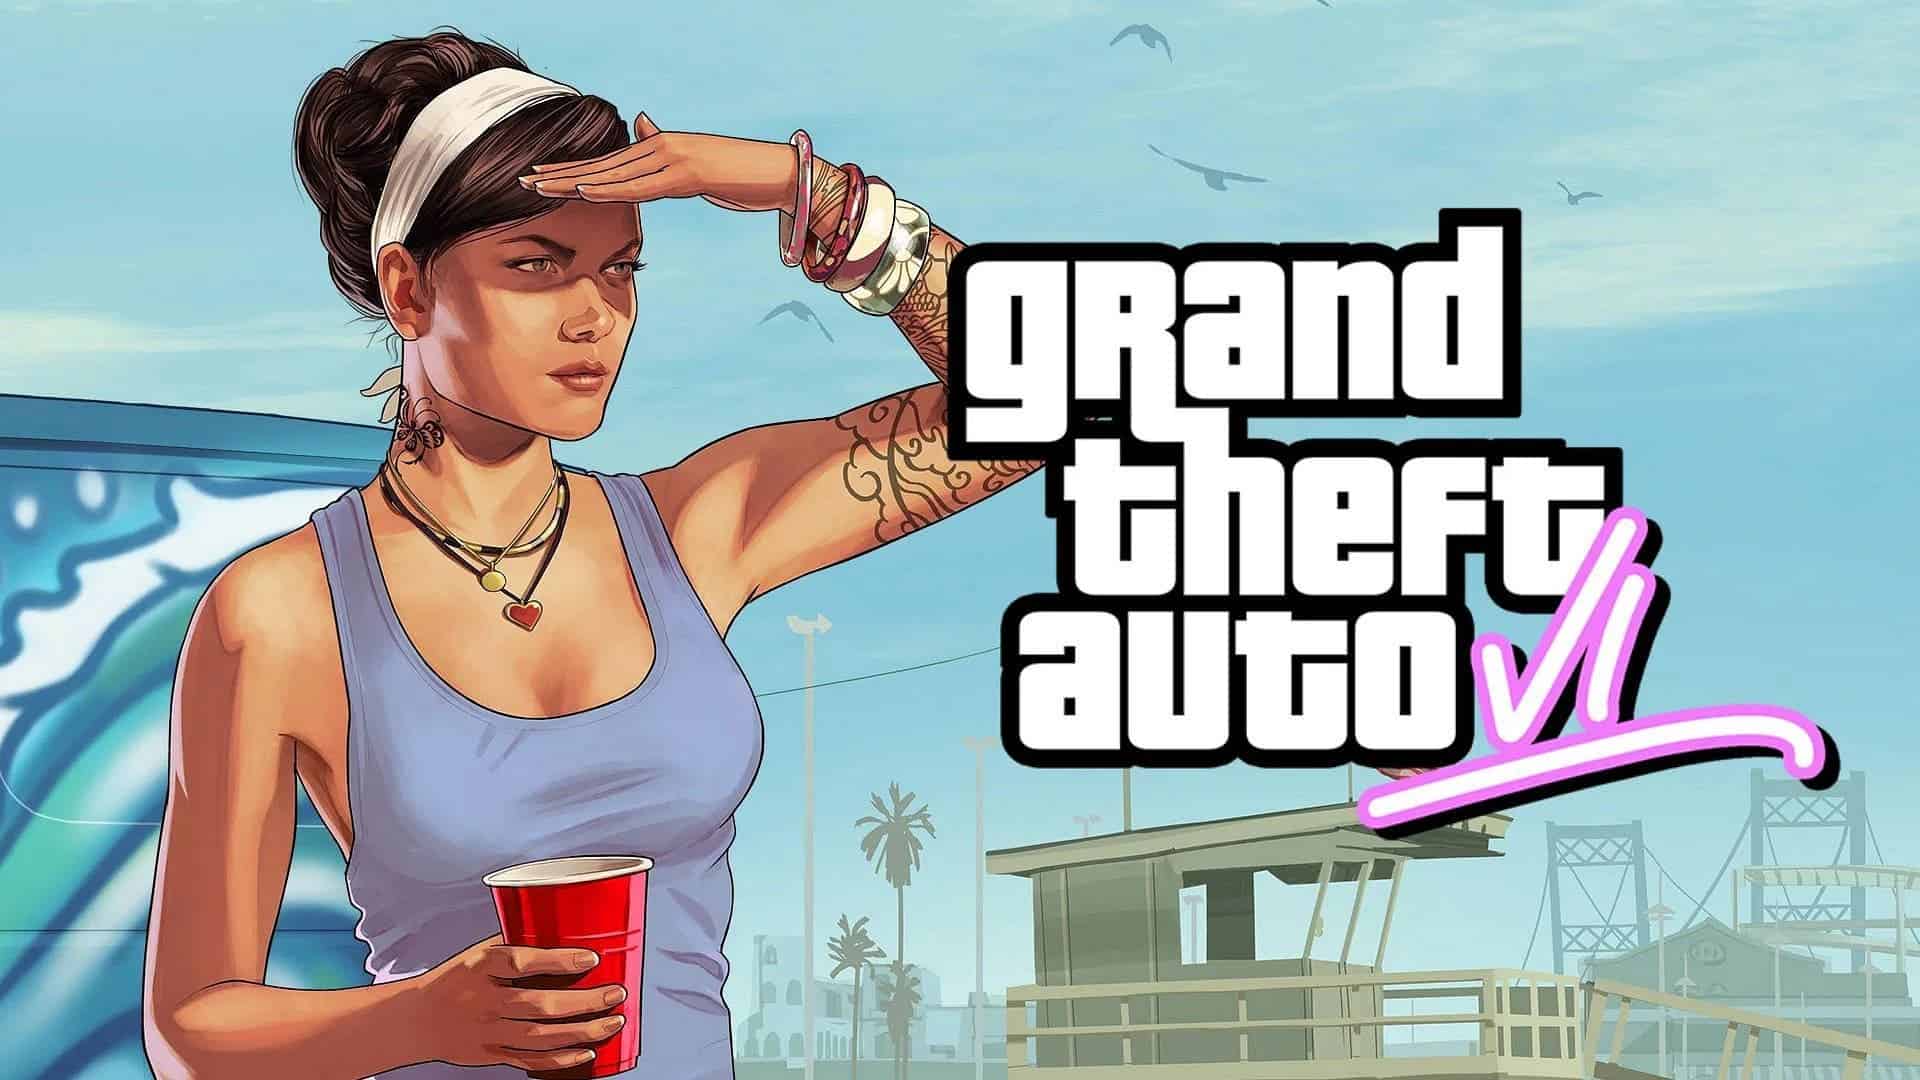 Grand Theft Auto: ViceCity - Apps on Google Play